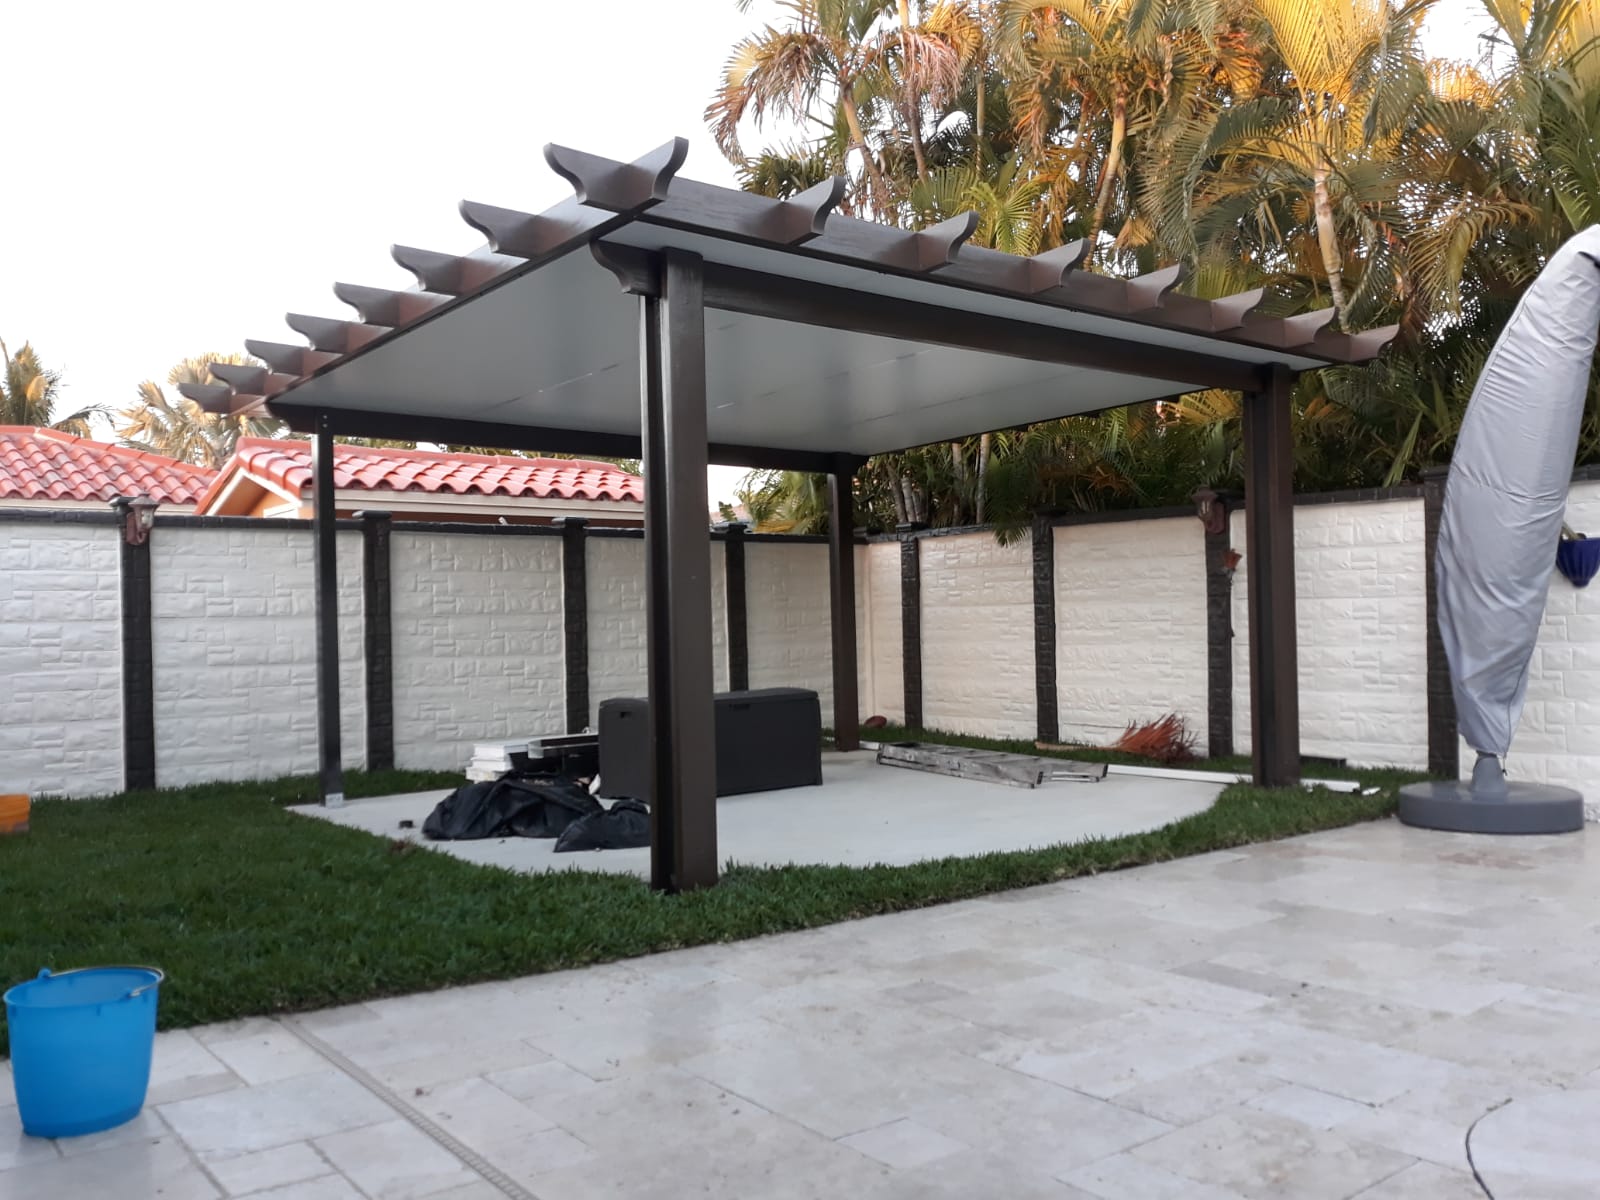 Energy-efficient aluminum insulated pergola for Miami's hot and humid climate.